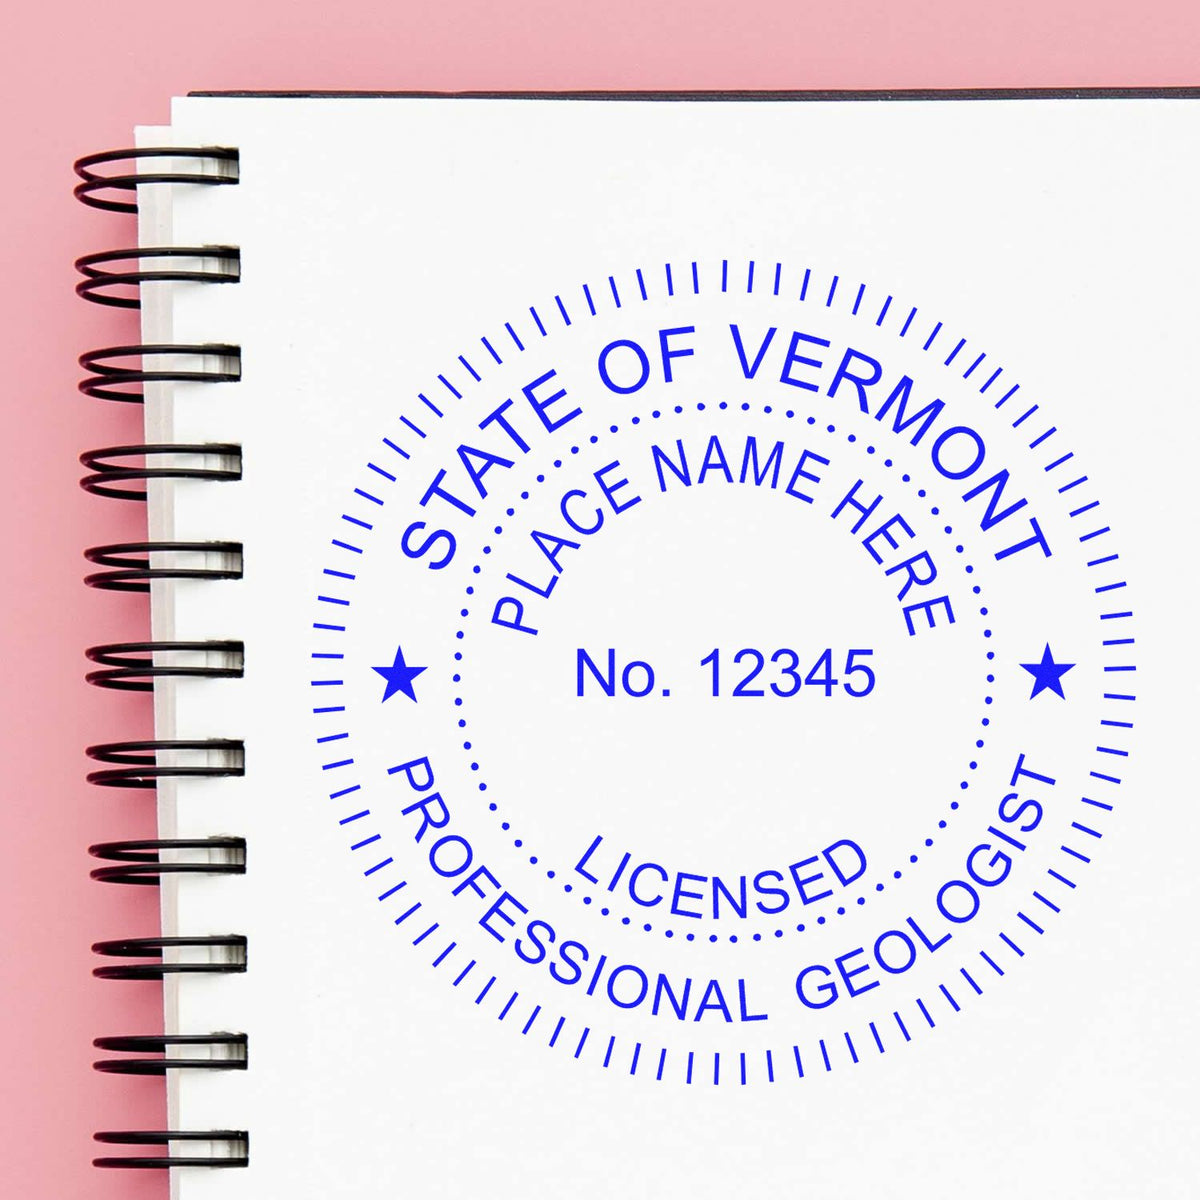 An alternative view of the Vermont Professional Geologist Seal Stamp stamped on a sheet of paper showing the image in use